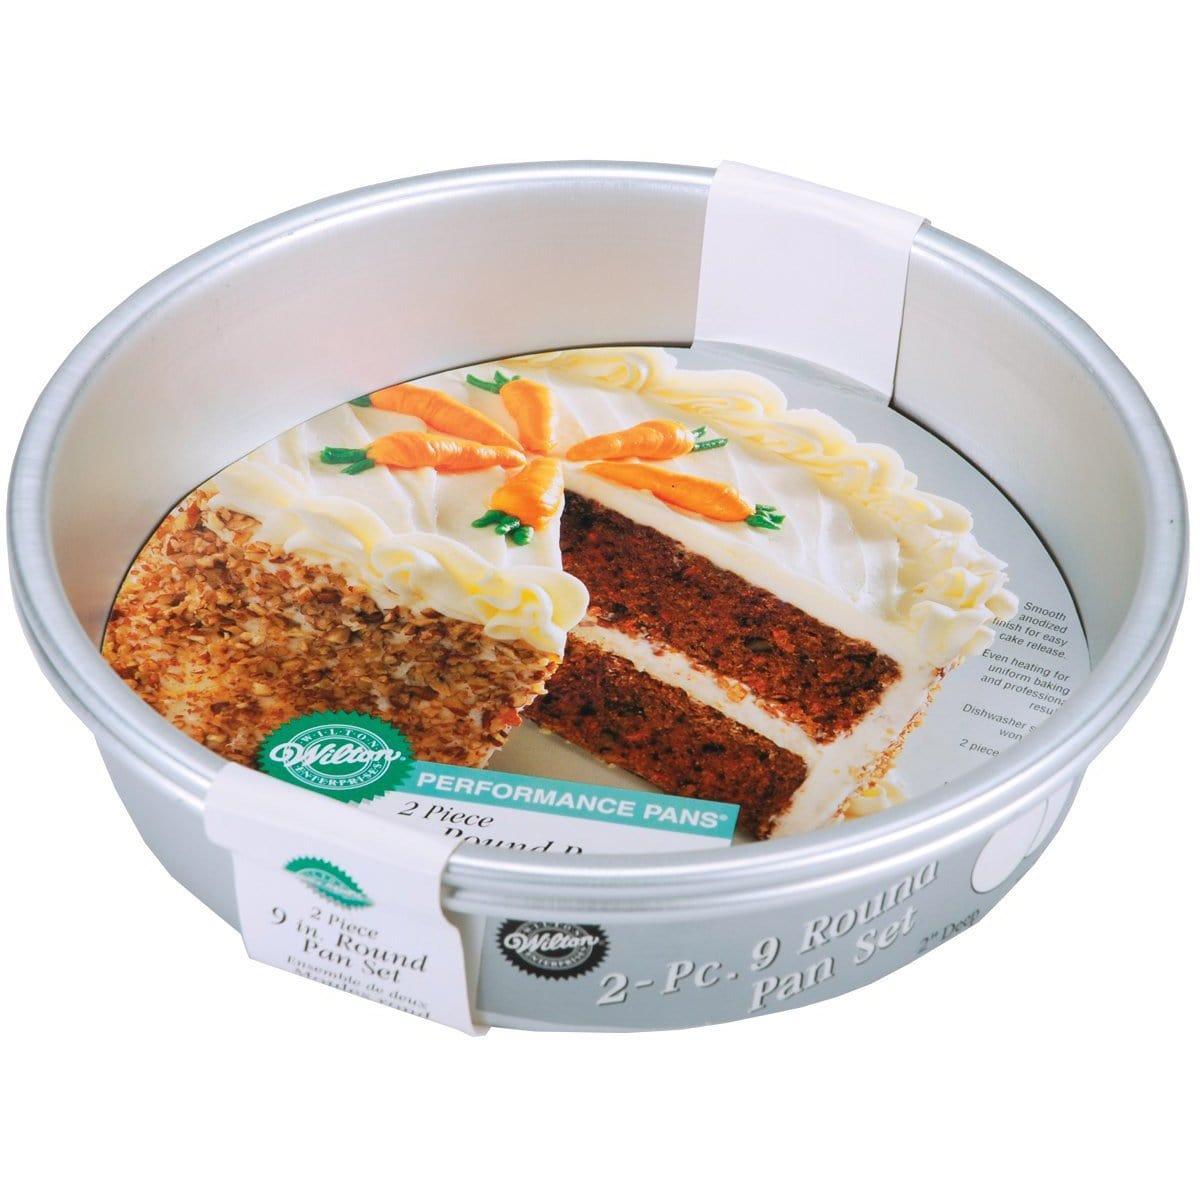 Buy Cake Supplies Deep Round Performance Pan 9 X 2 In. 2/Pkg. sold at Party Expert